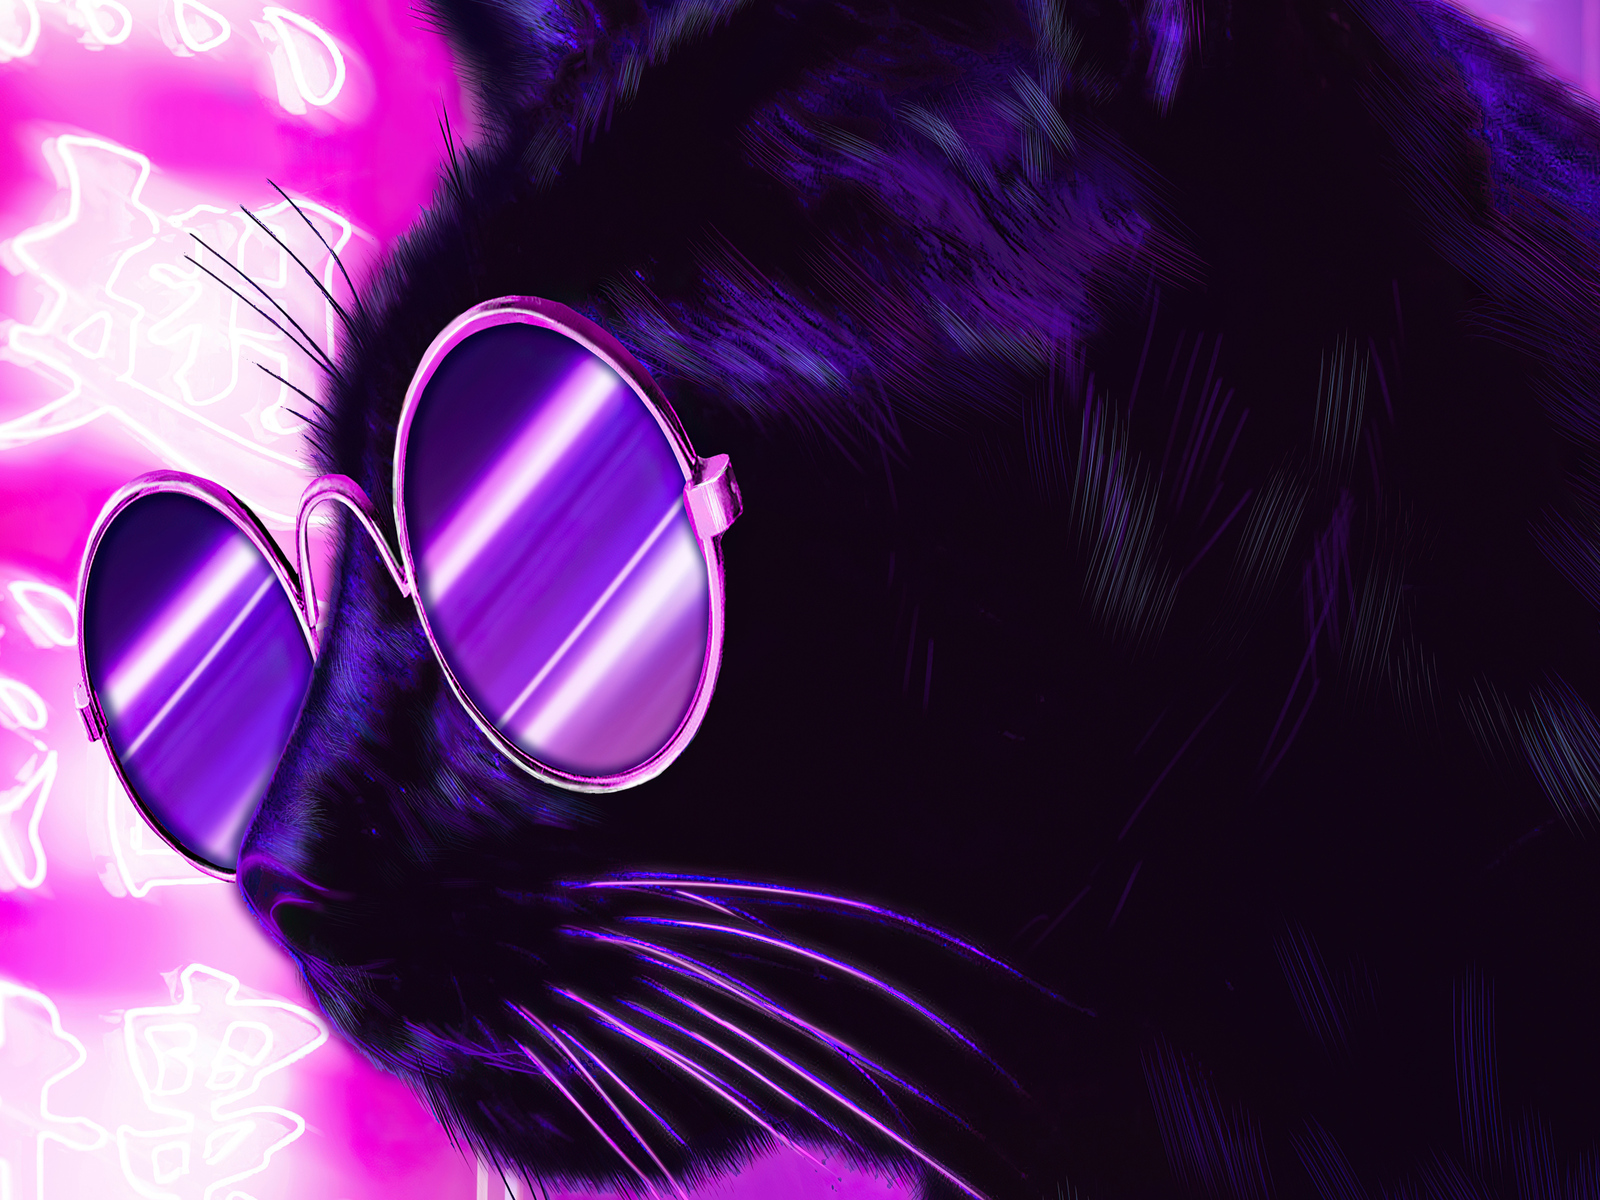 A cat wearing sunglasses with pink and purple background - Neon purple